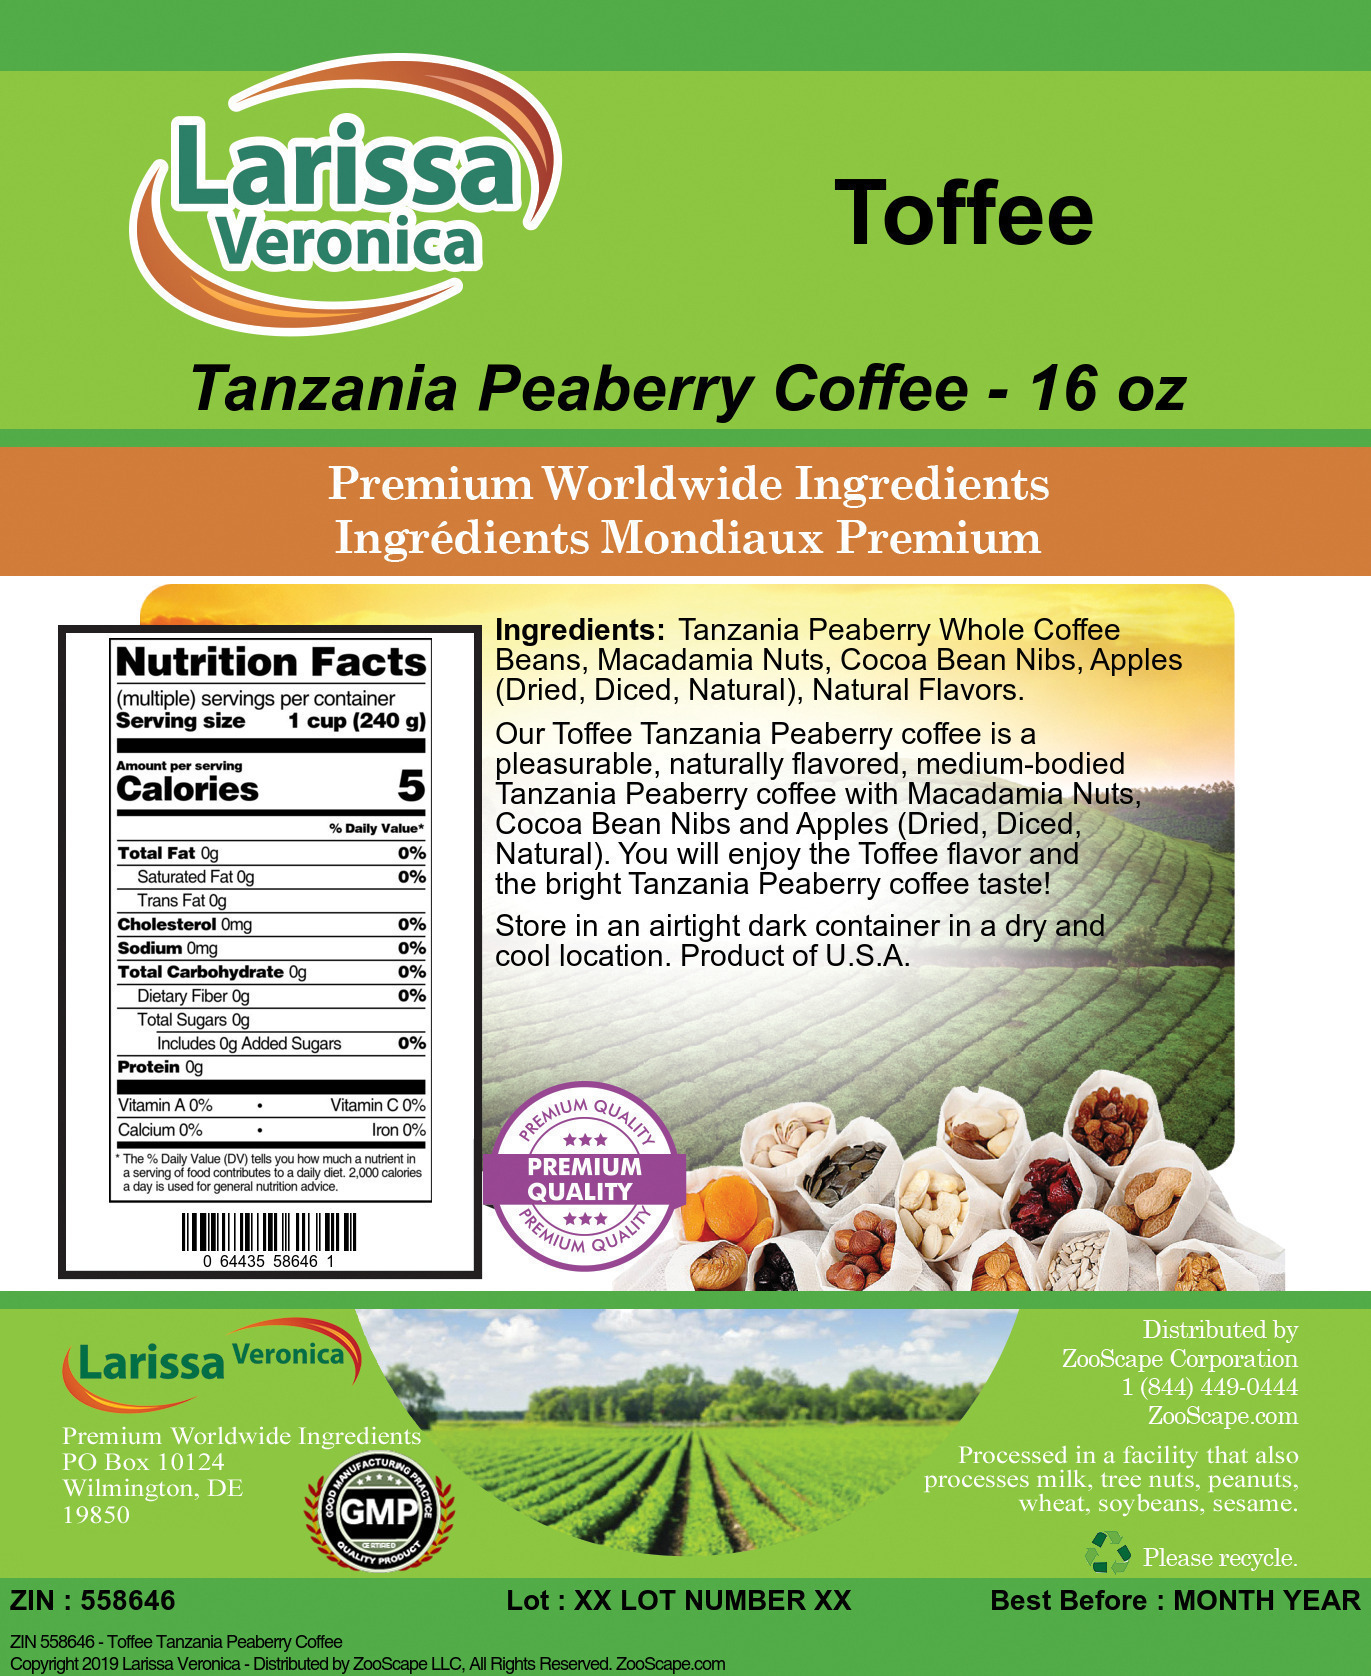 Toffee Tanzania Peaberry Coffee - Label